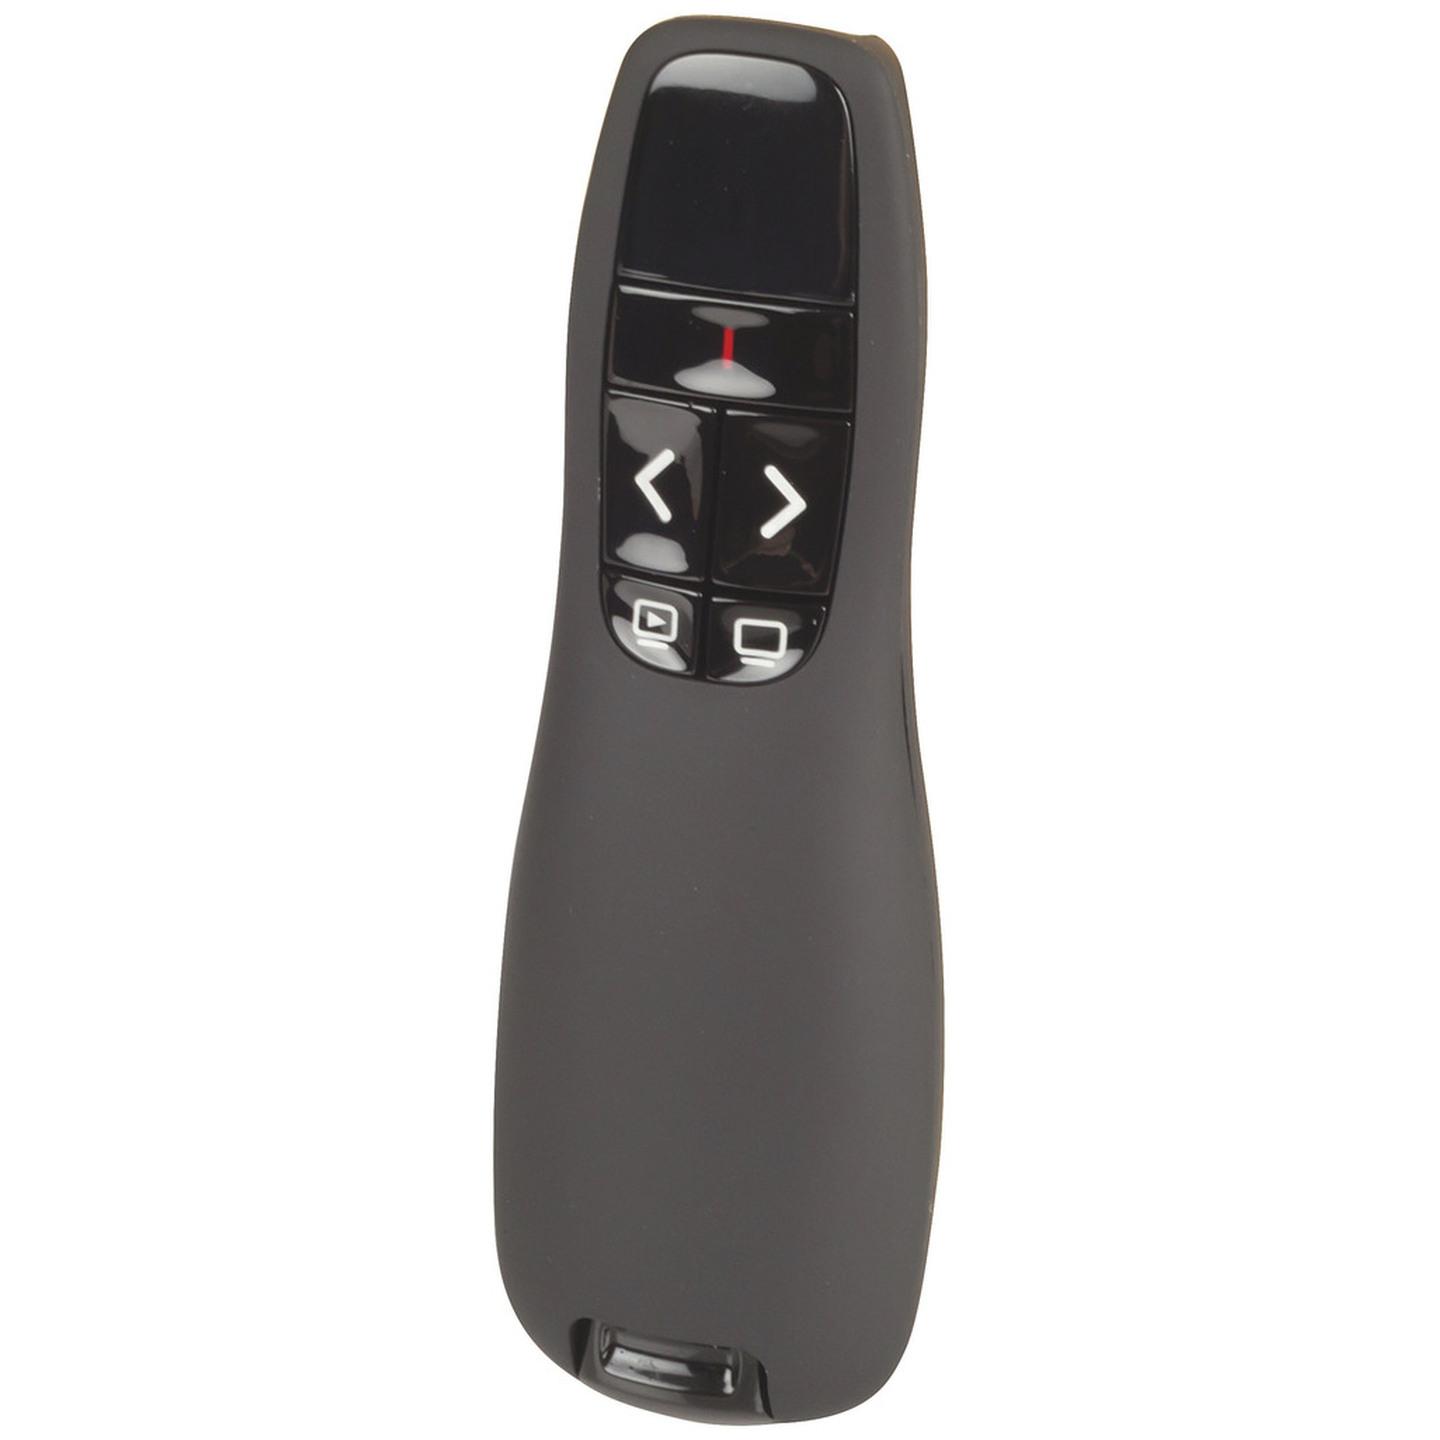 Wireless Laser Presenter with USB Dongle